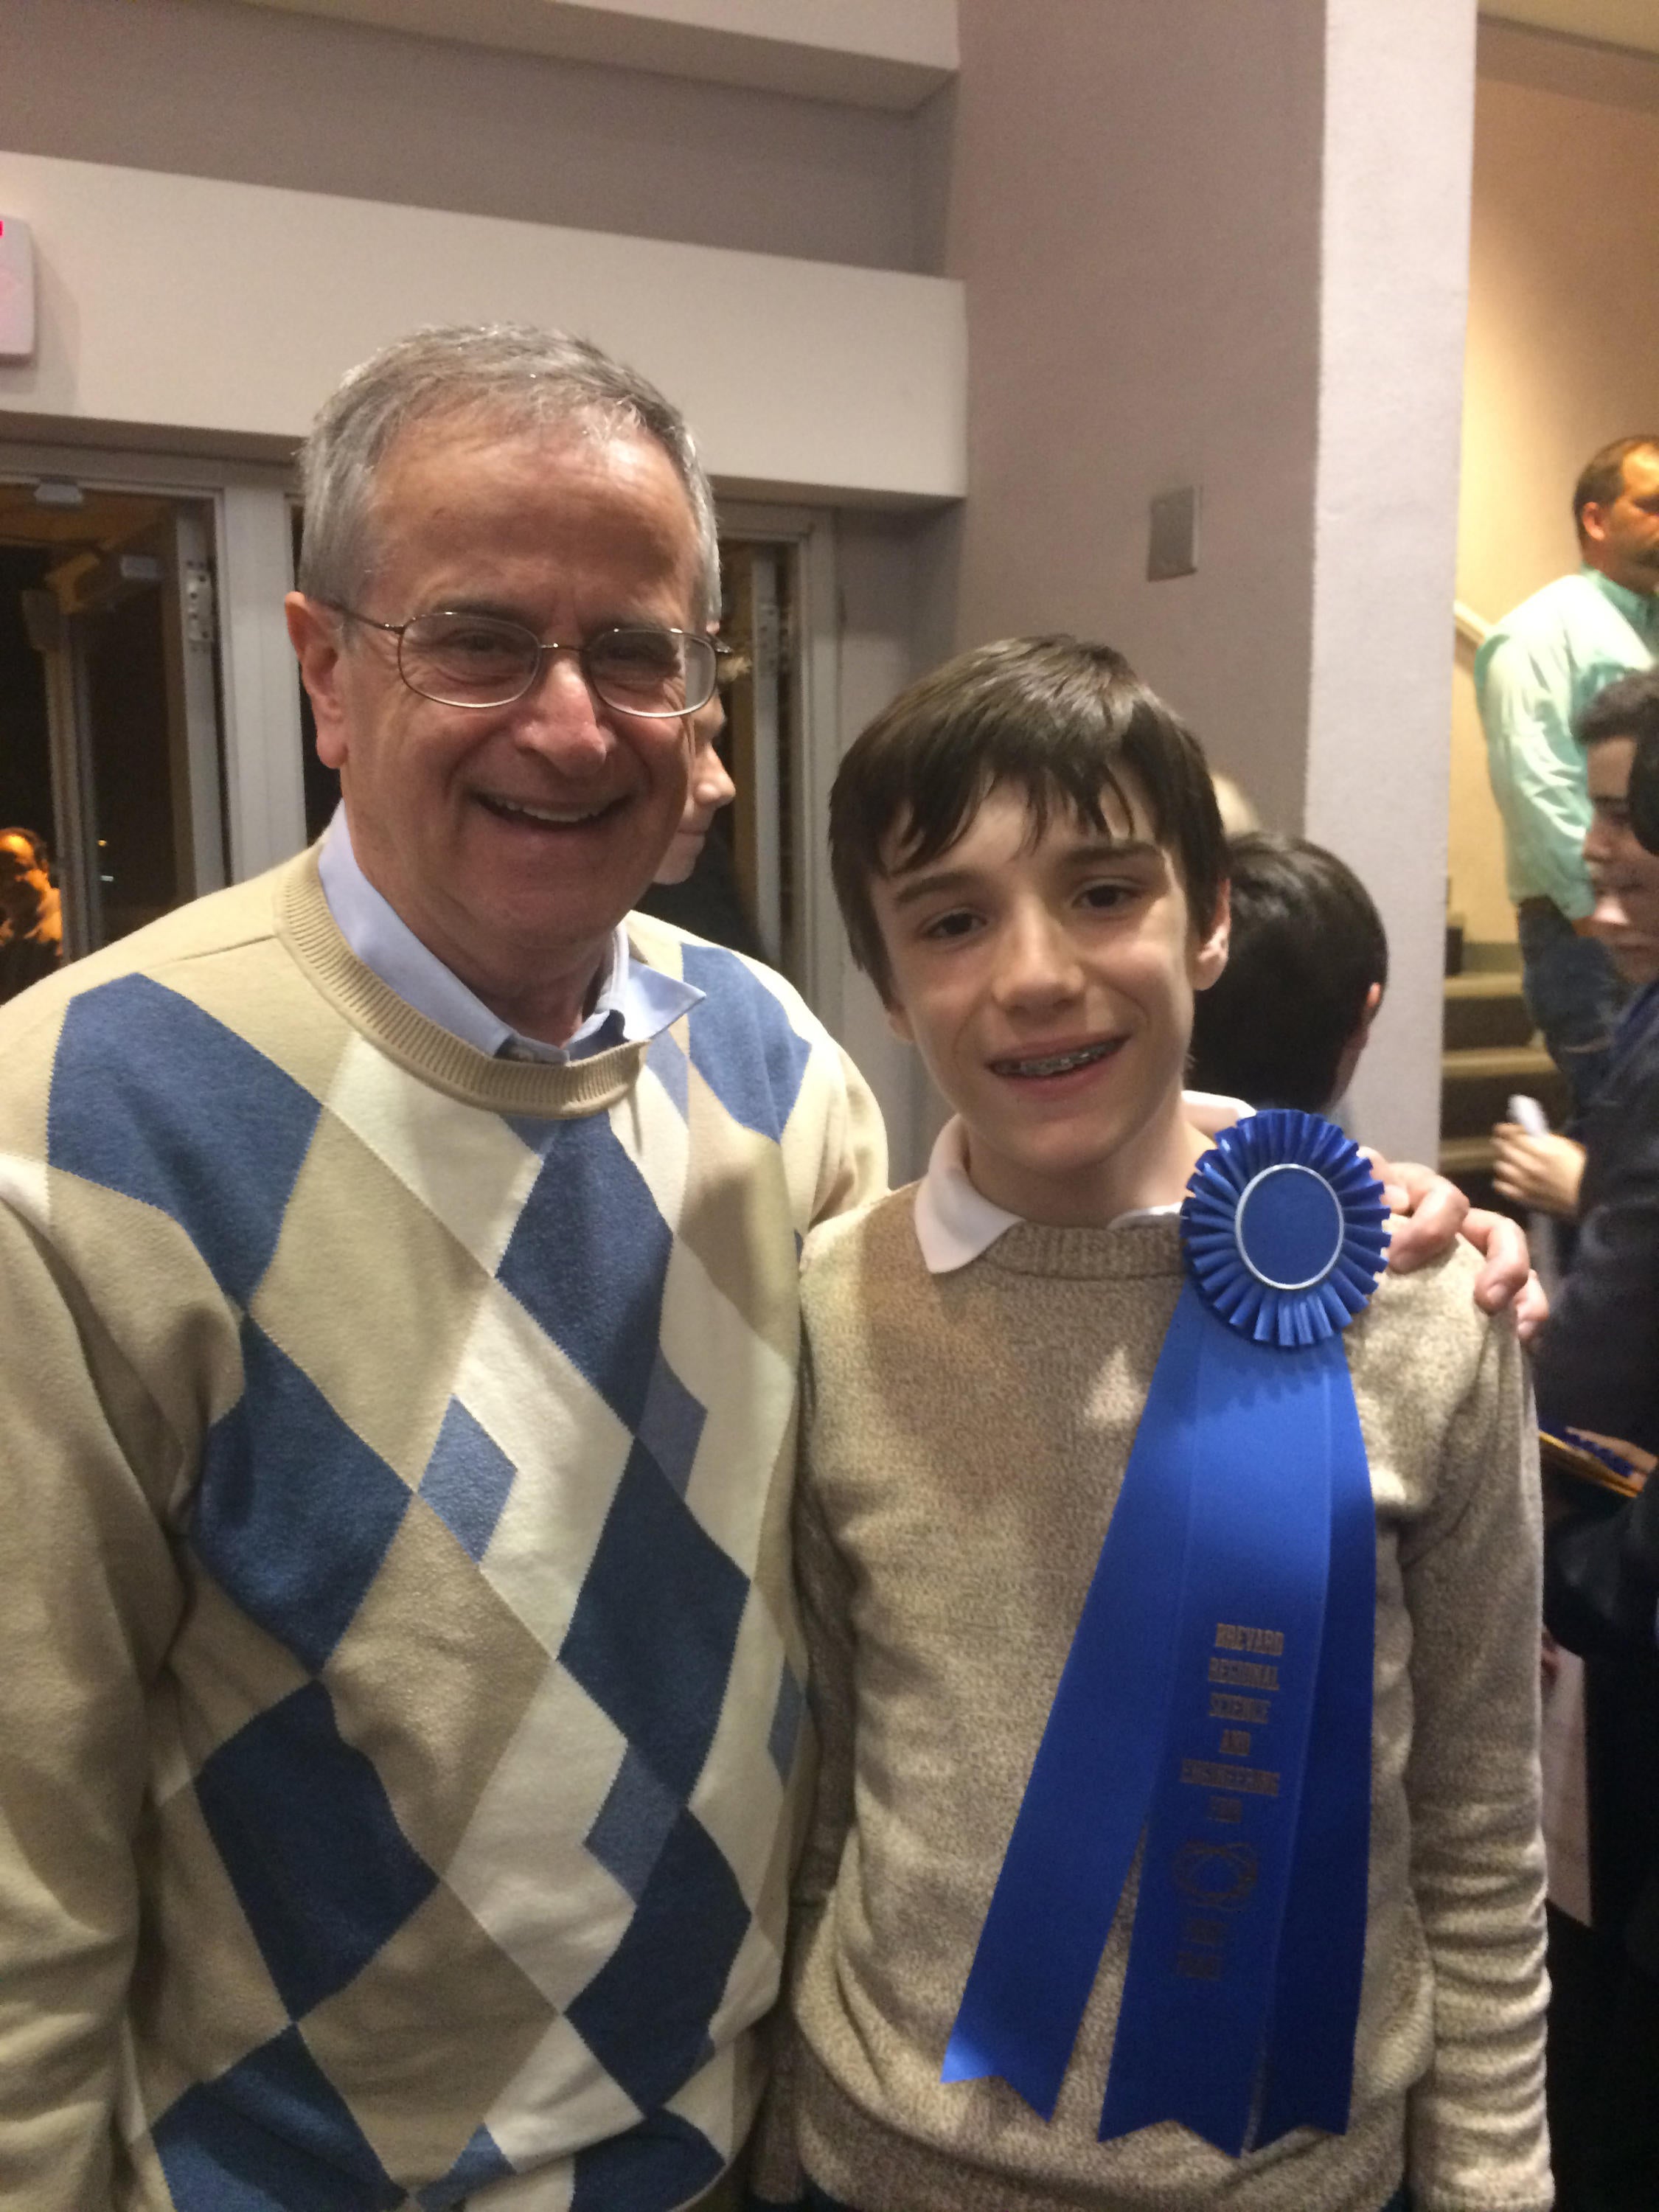 Charles Marzzacco and Charles Pepin – Charles Pepin has a blue ribbon on